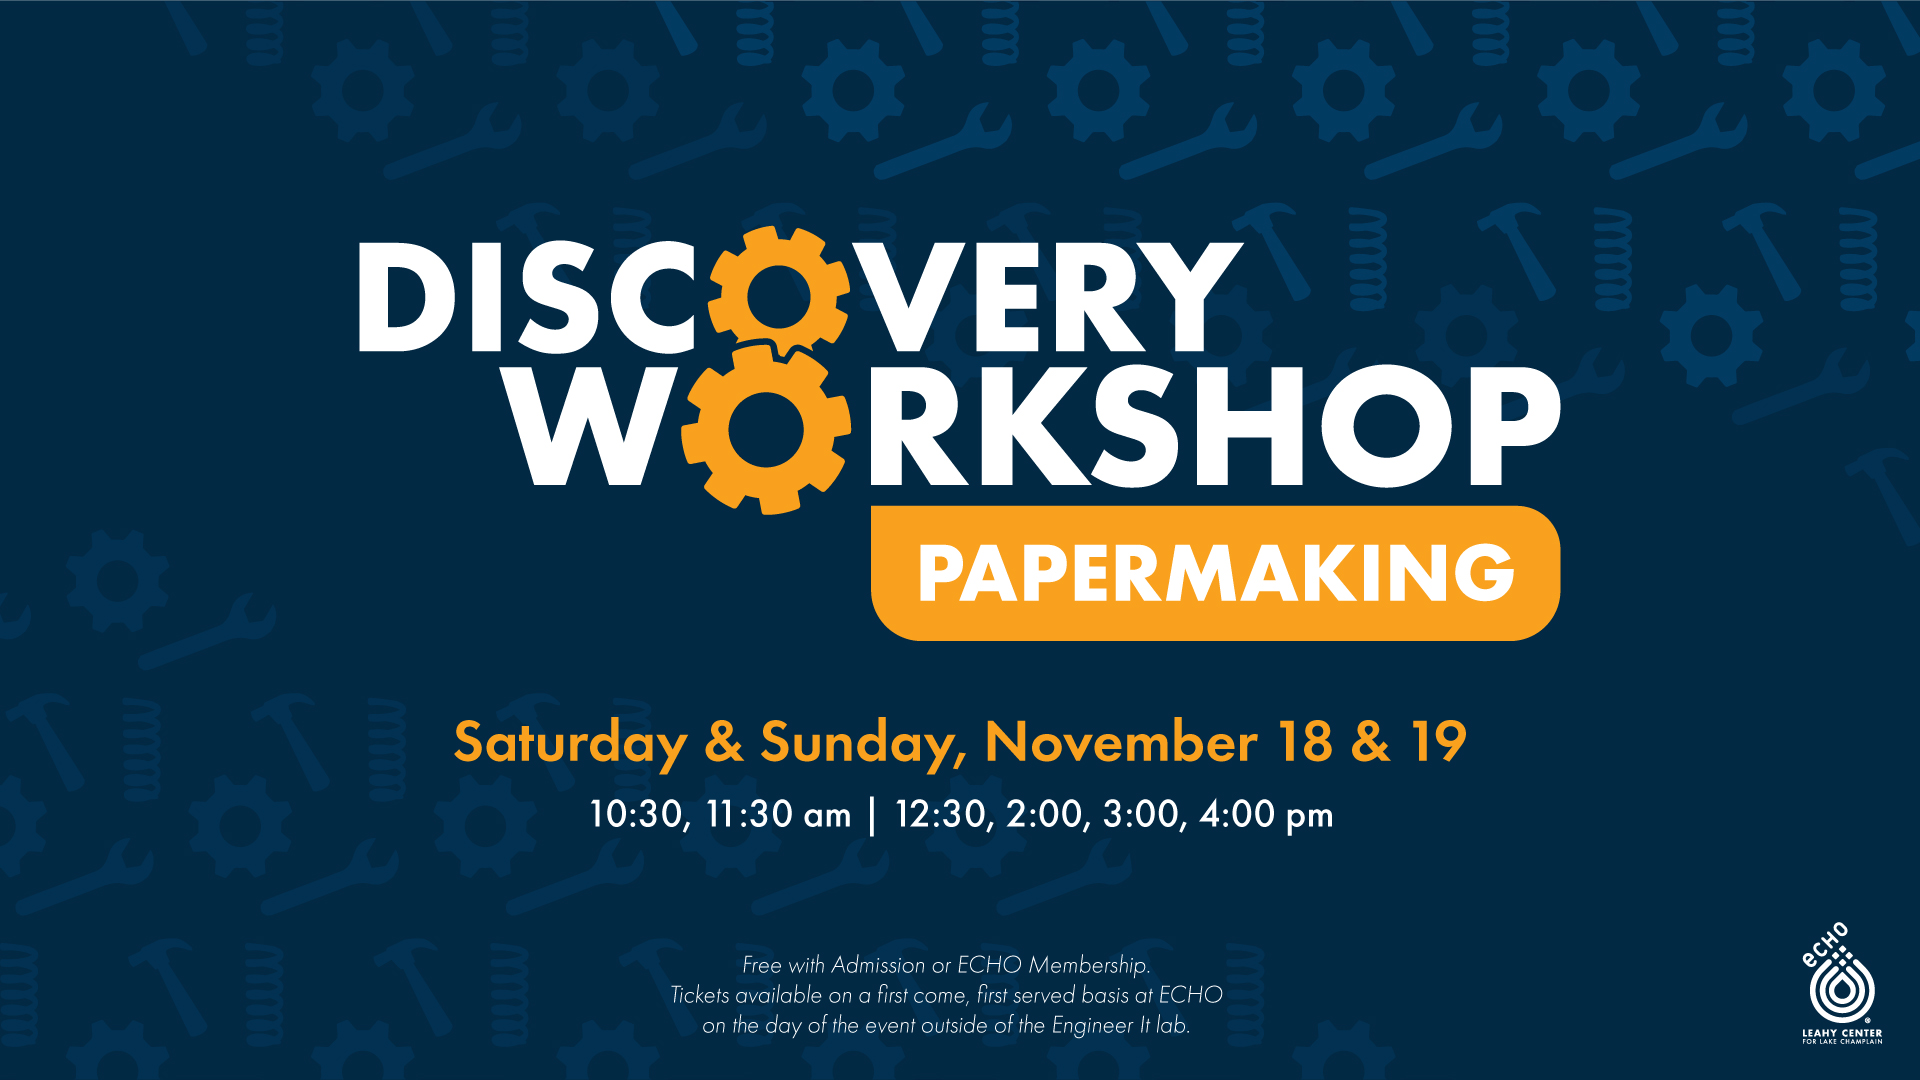 Blue & orange promotional graphic for the papermaking Discovery Workshop